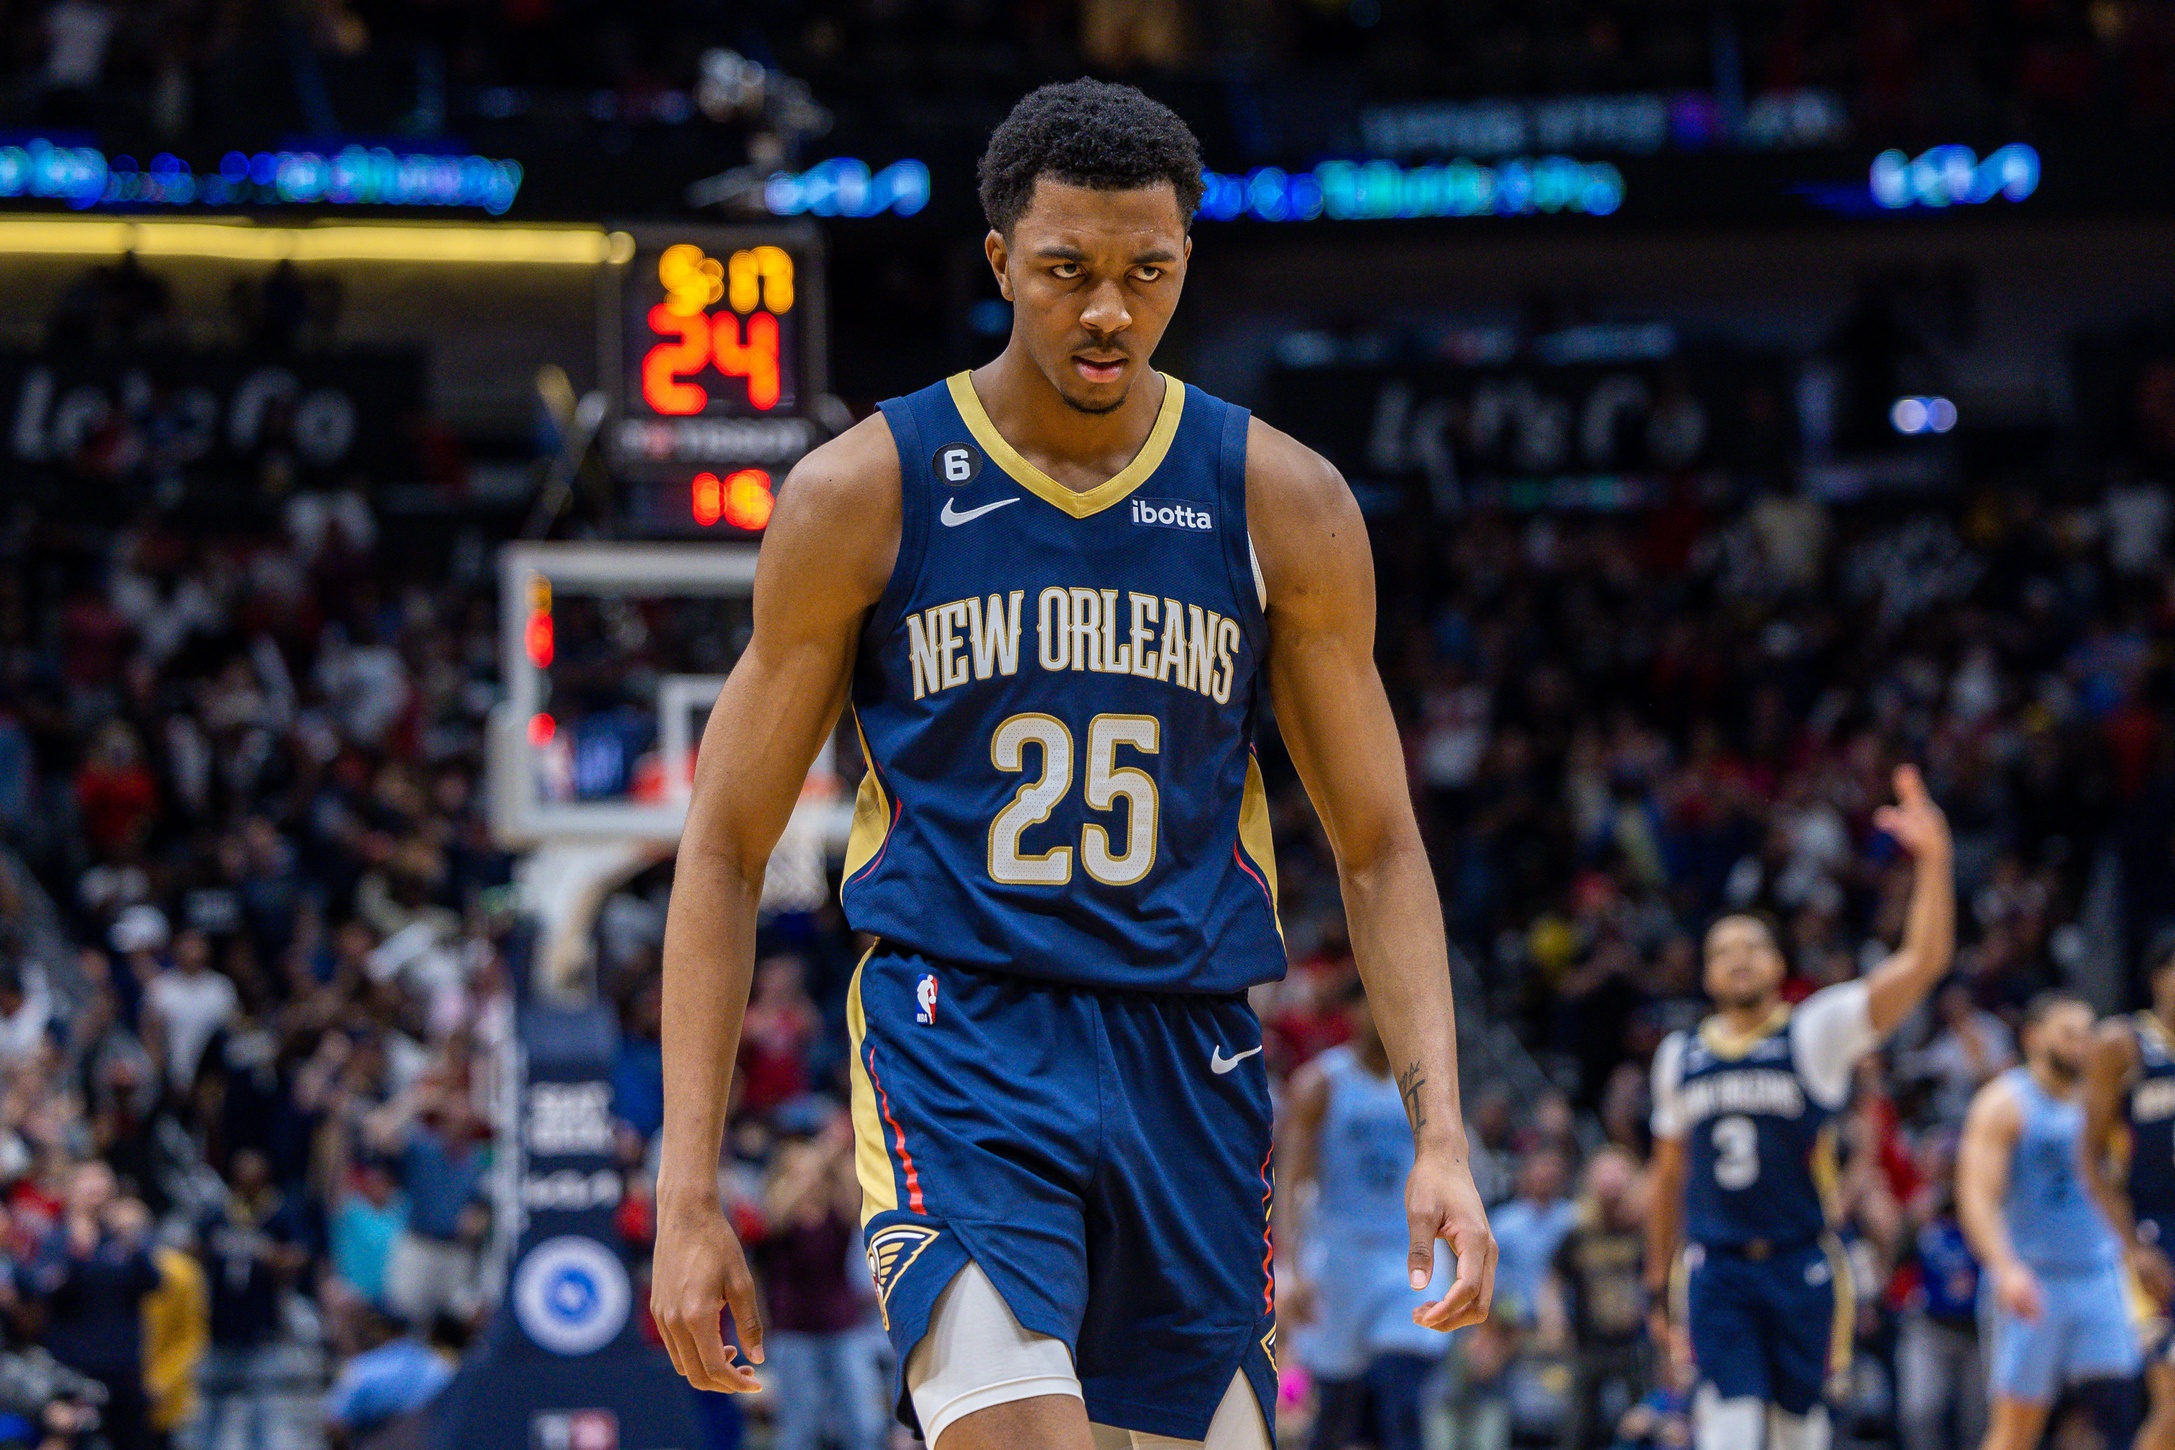 Apr 5, 2023; New Orleans, Louisiana, USA; New Orleans Pelicans guard Trey Murphy III (25) reacts to making a three point basket against the Memphis Grizzlies during the second half at Smoothie King Center. Mandatory Credit: Stephen Lew-USA TODAY Sports